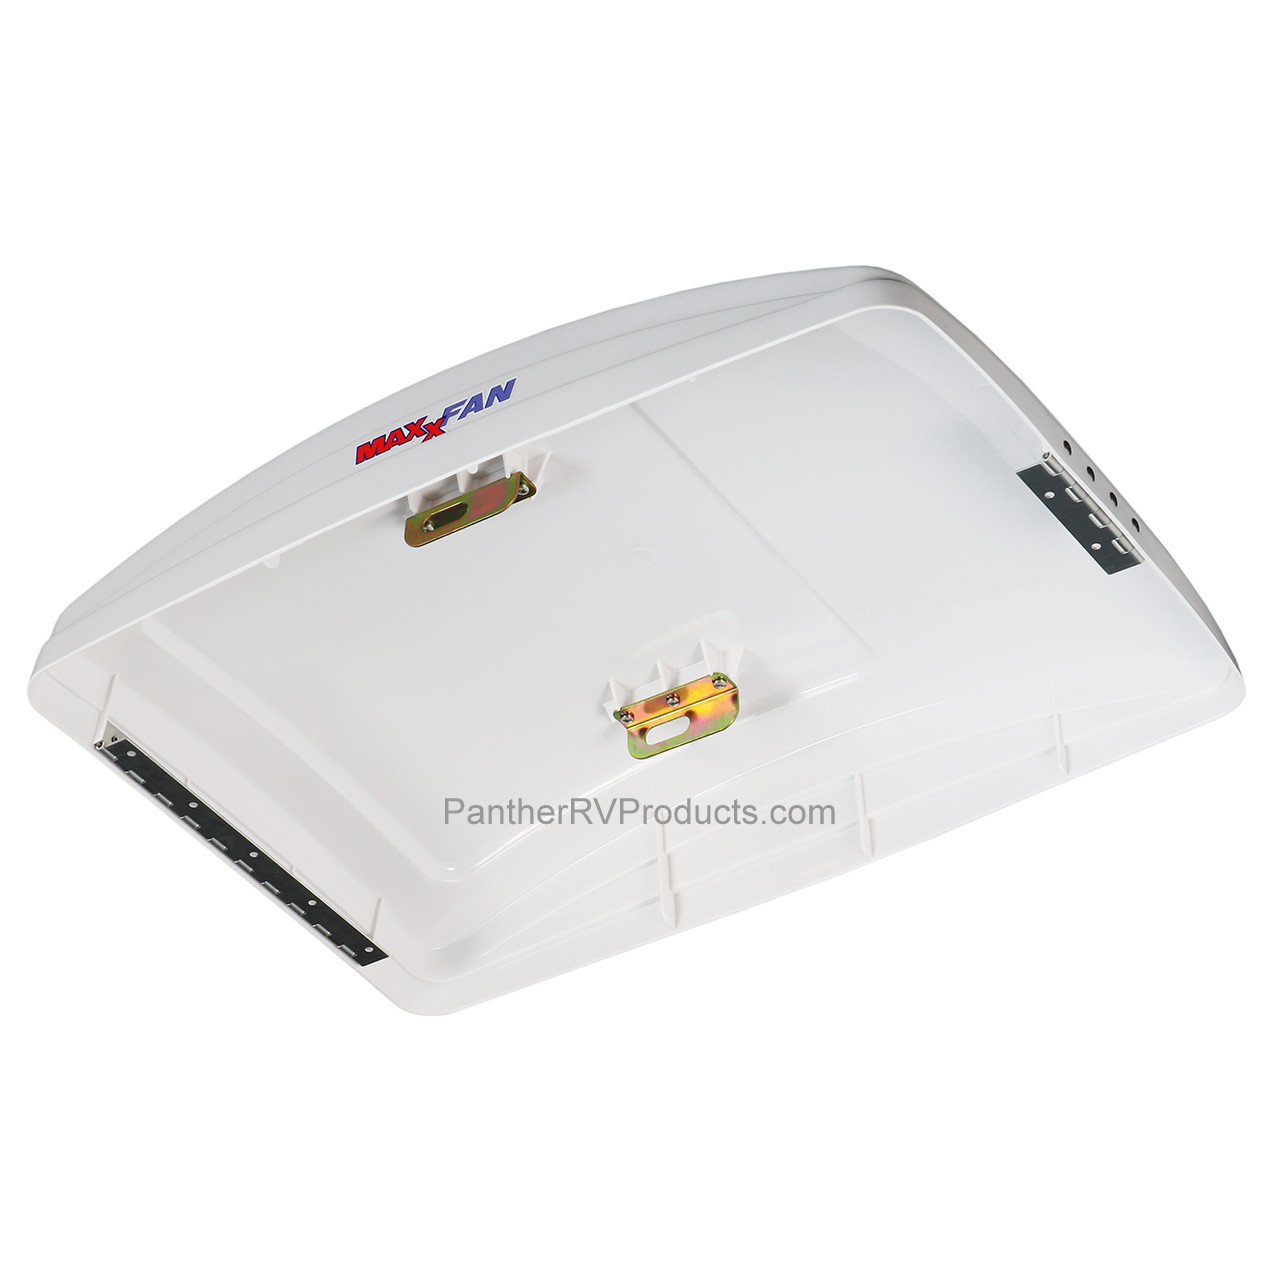 Maxxair 05-30510 OEM Roof Vent Deluxe Replacement Lid - White